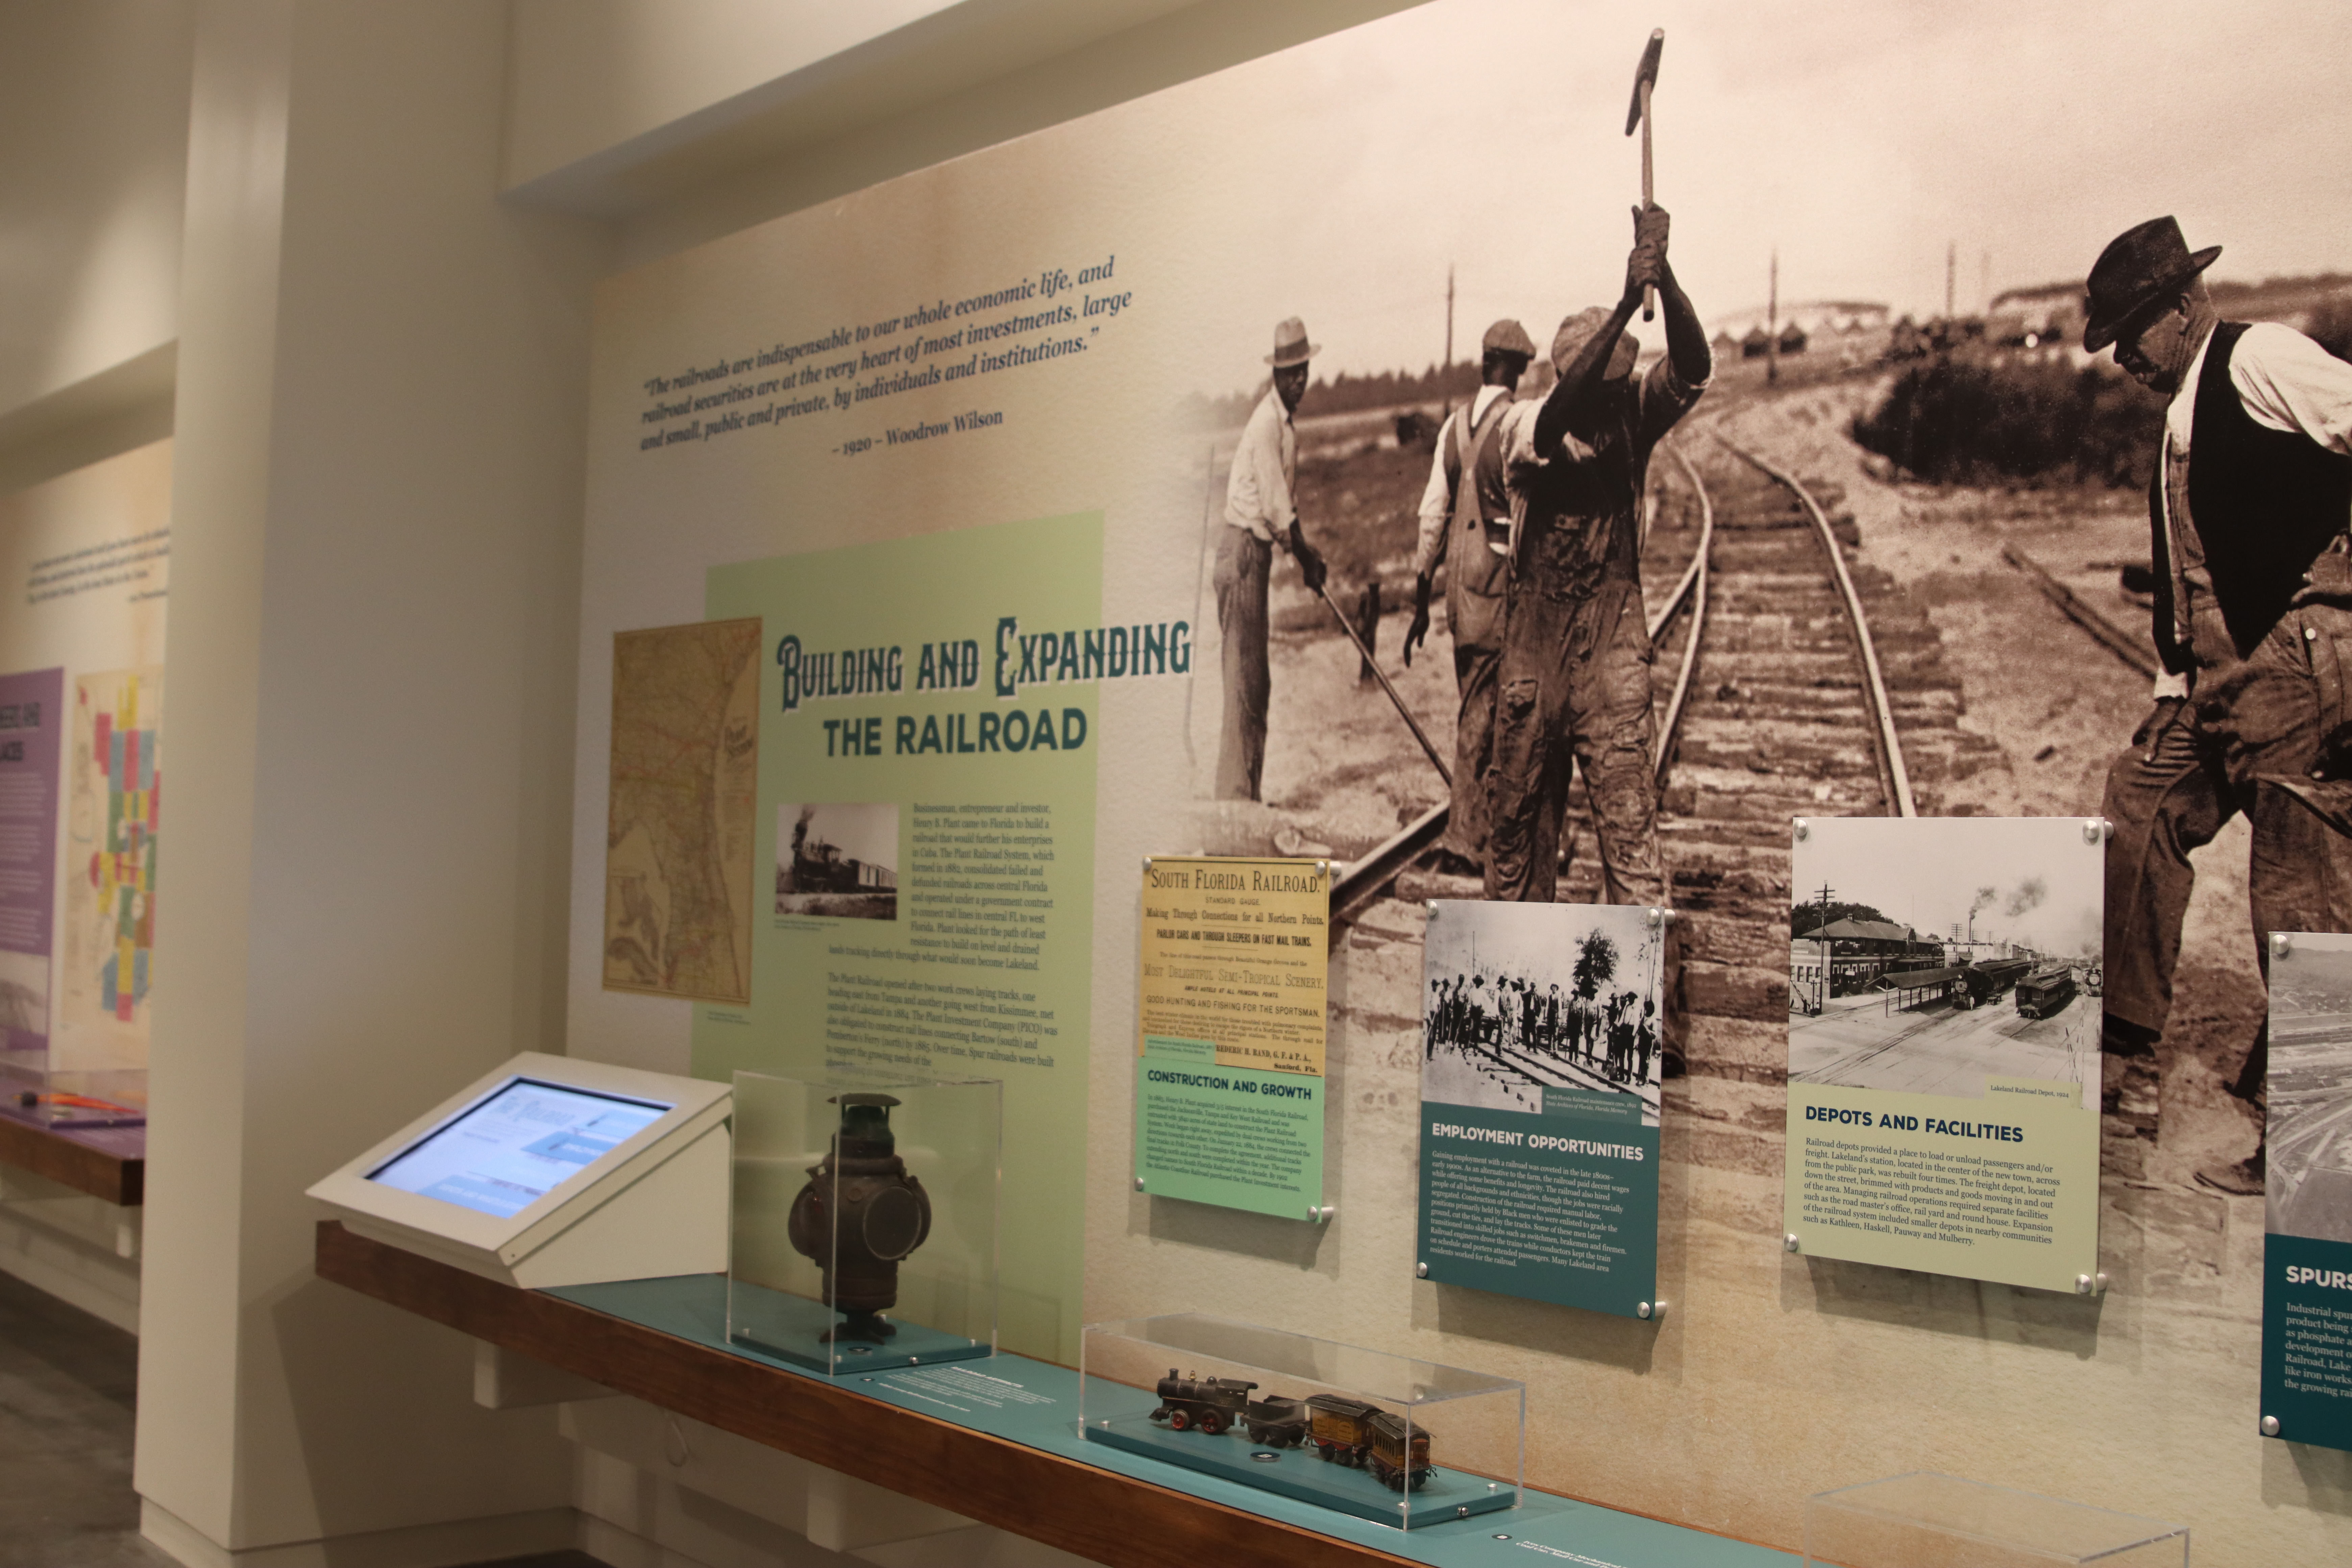 View within the Lakeland History and Culture Center of information panel "Building and Expanding the Railroad" with photo of railroad workers